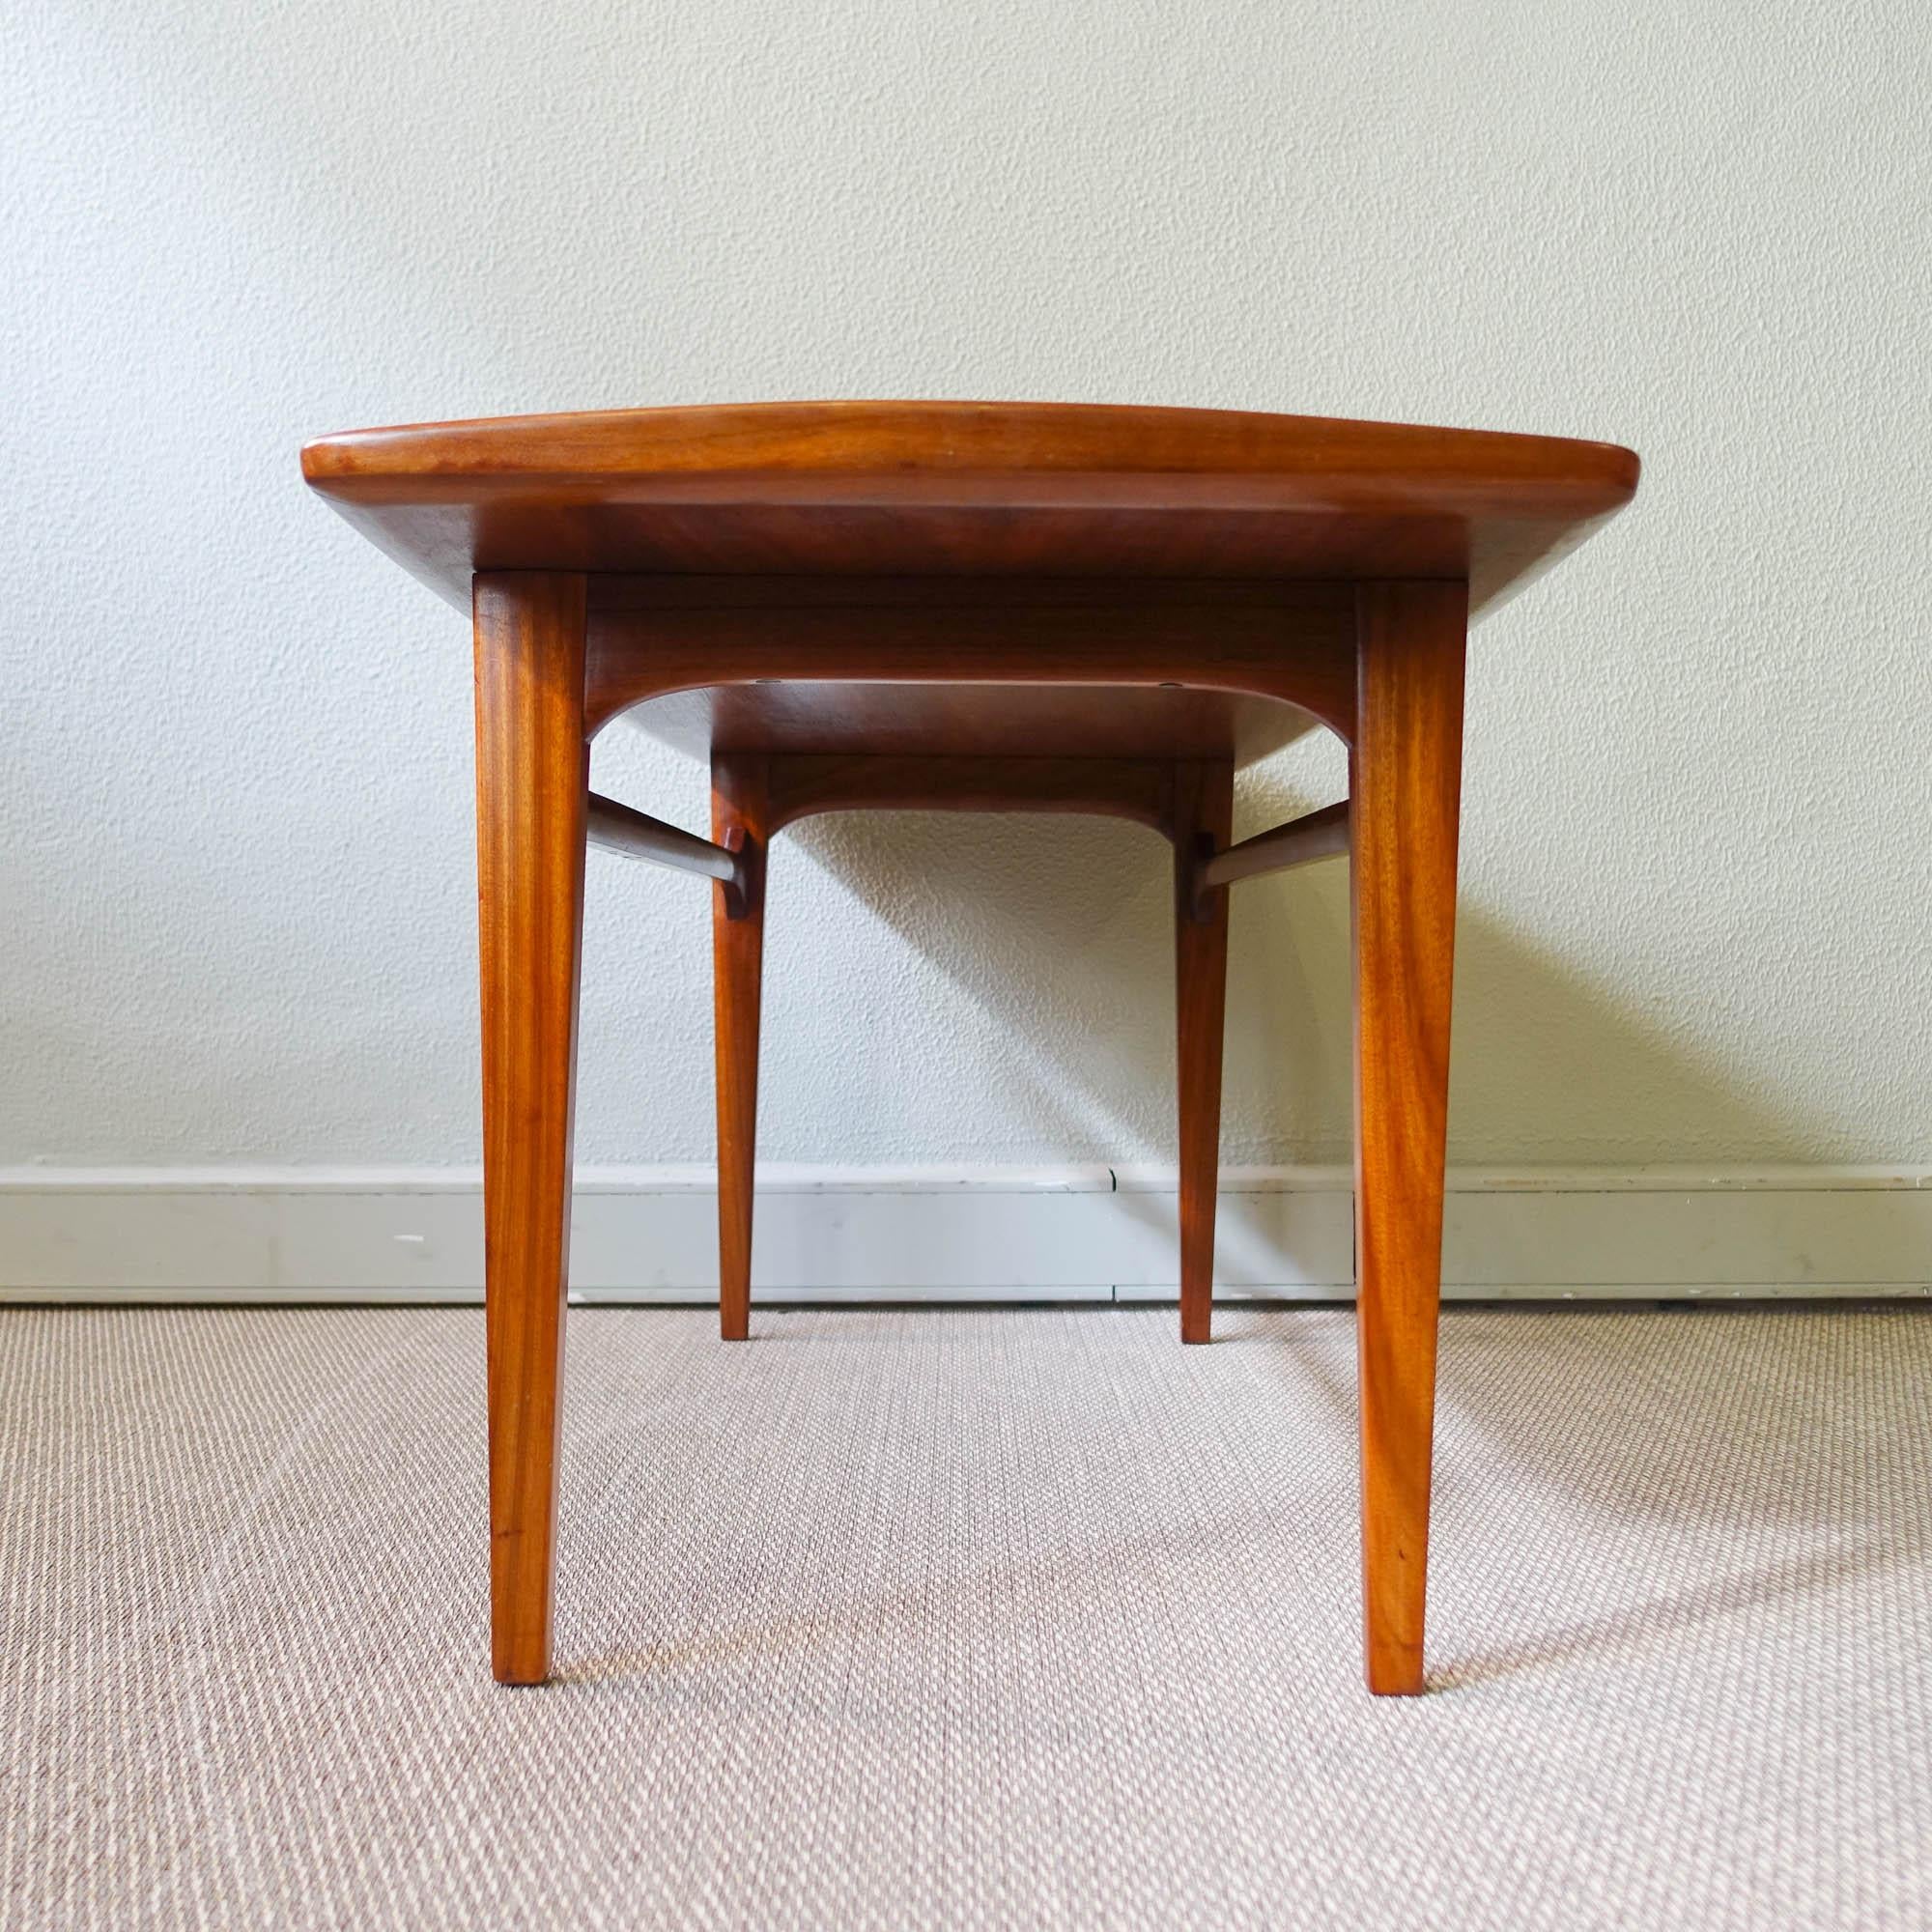 Wood Coffee Table, Model Excelsior, by José Espinho for Olaio, 1962 For Sale